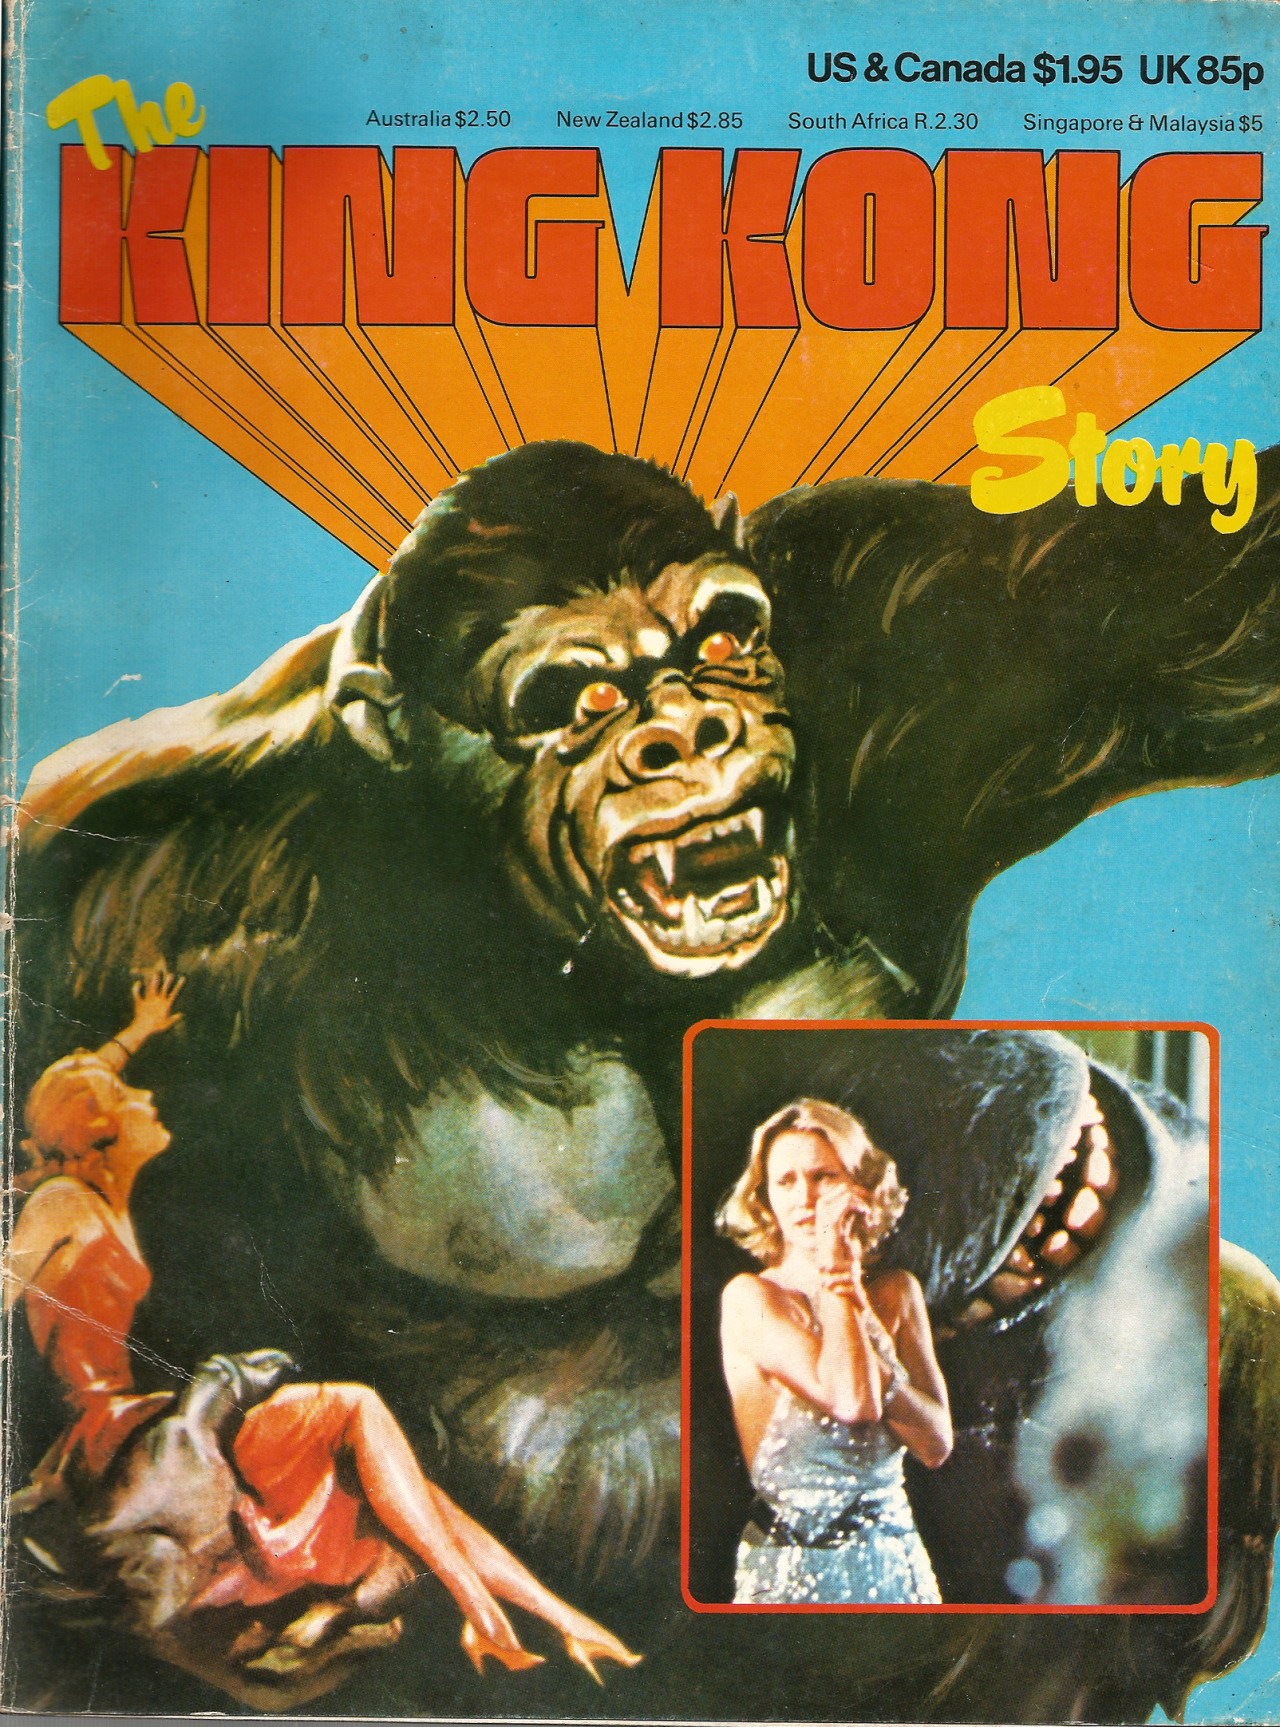 The King Kong Story, written and edited by Jeremy Pascall (Phoebus Publishing Co.